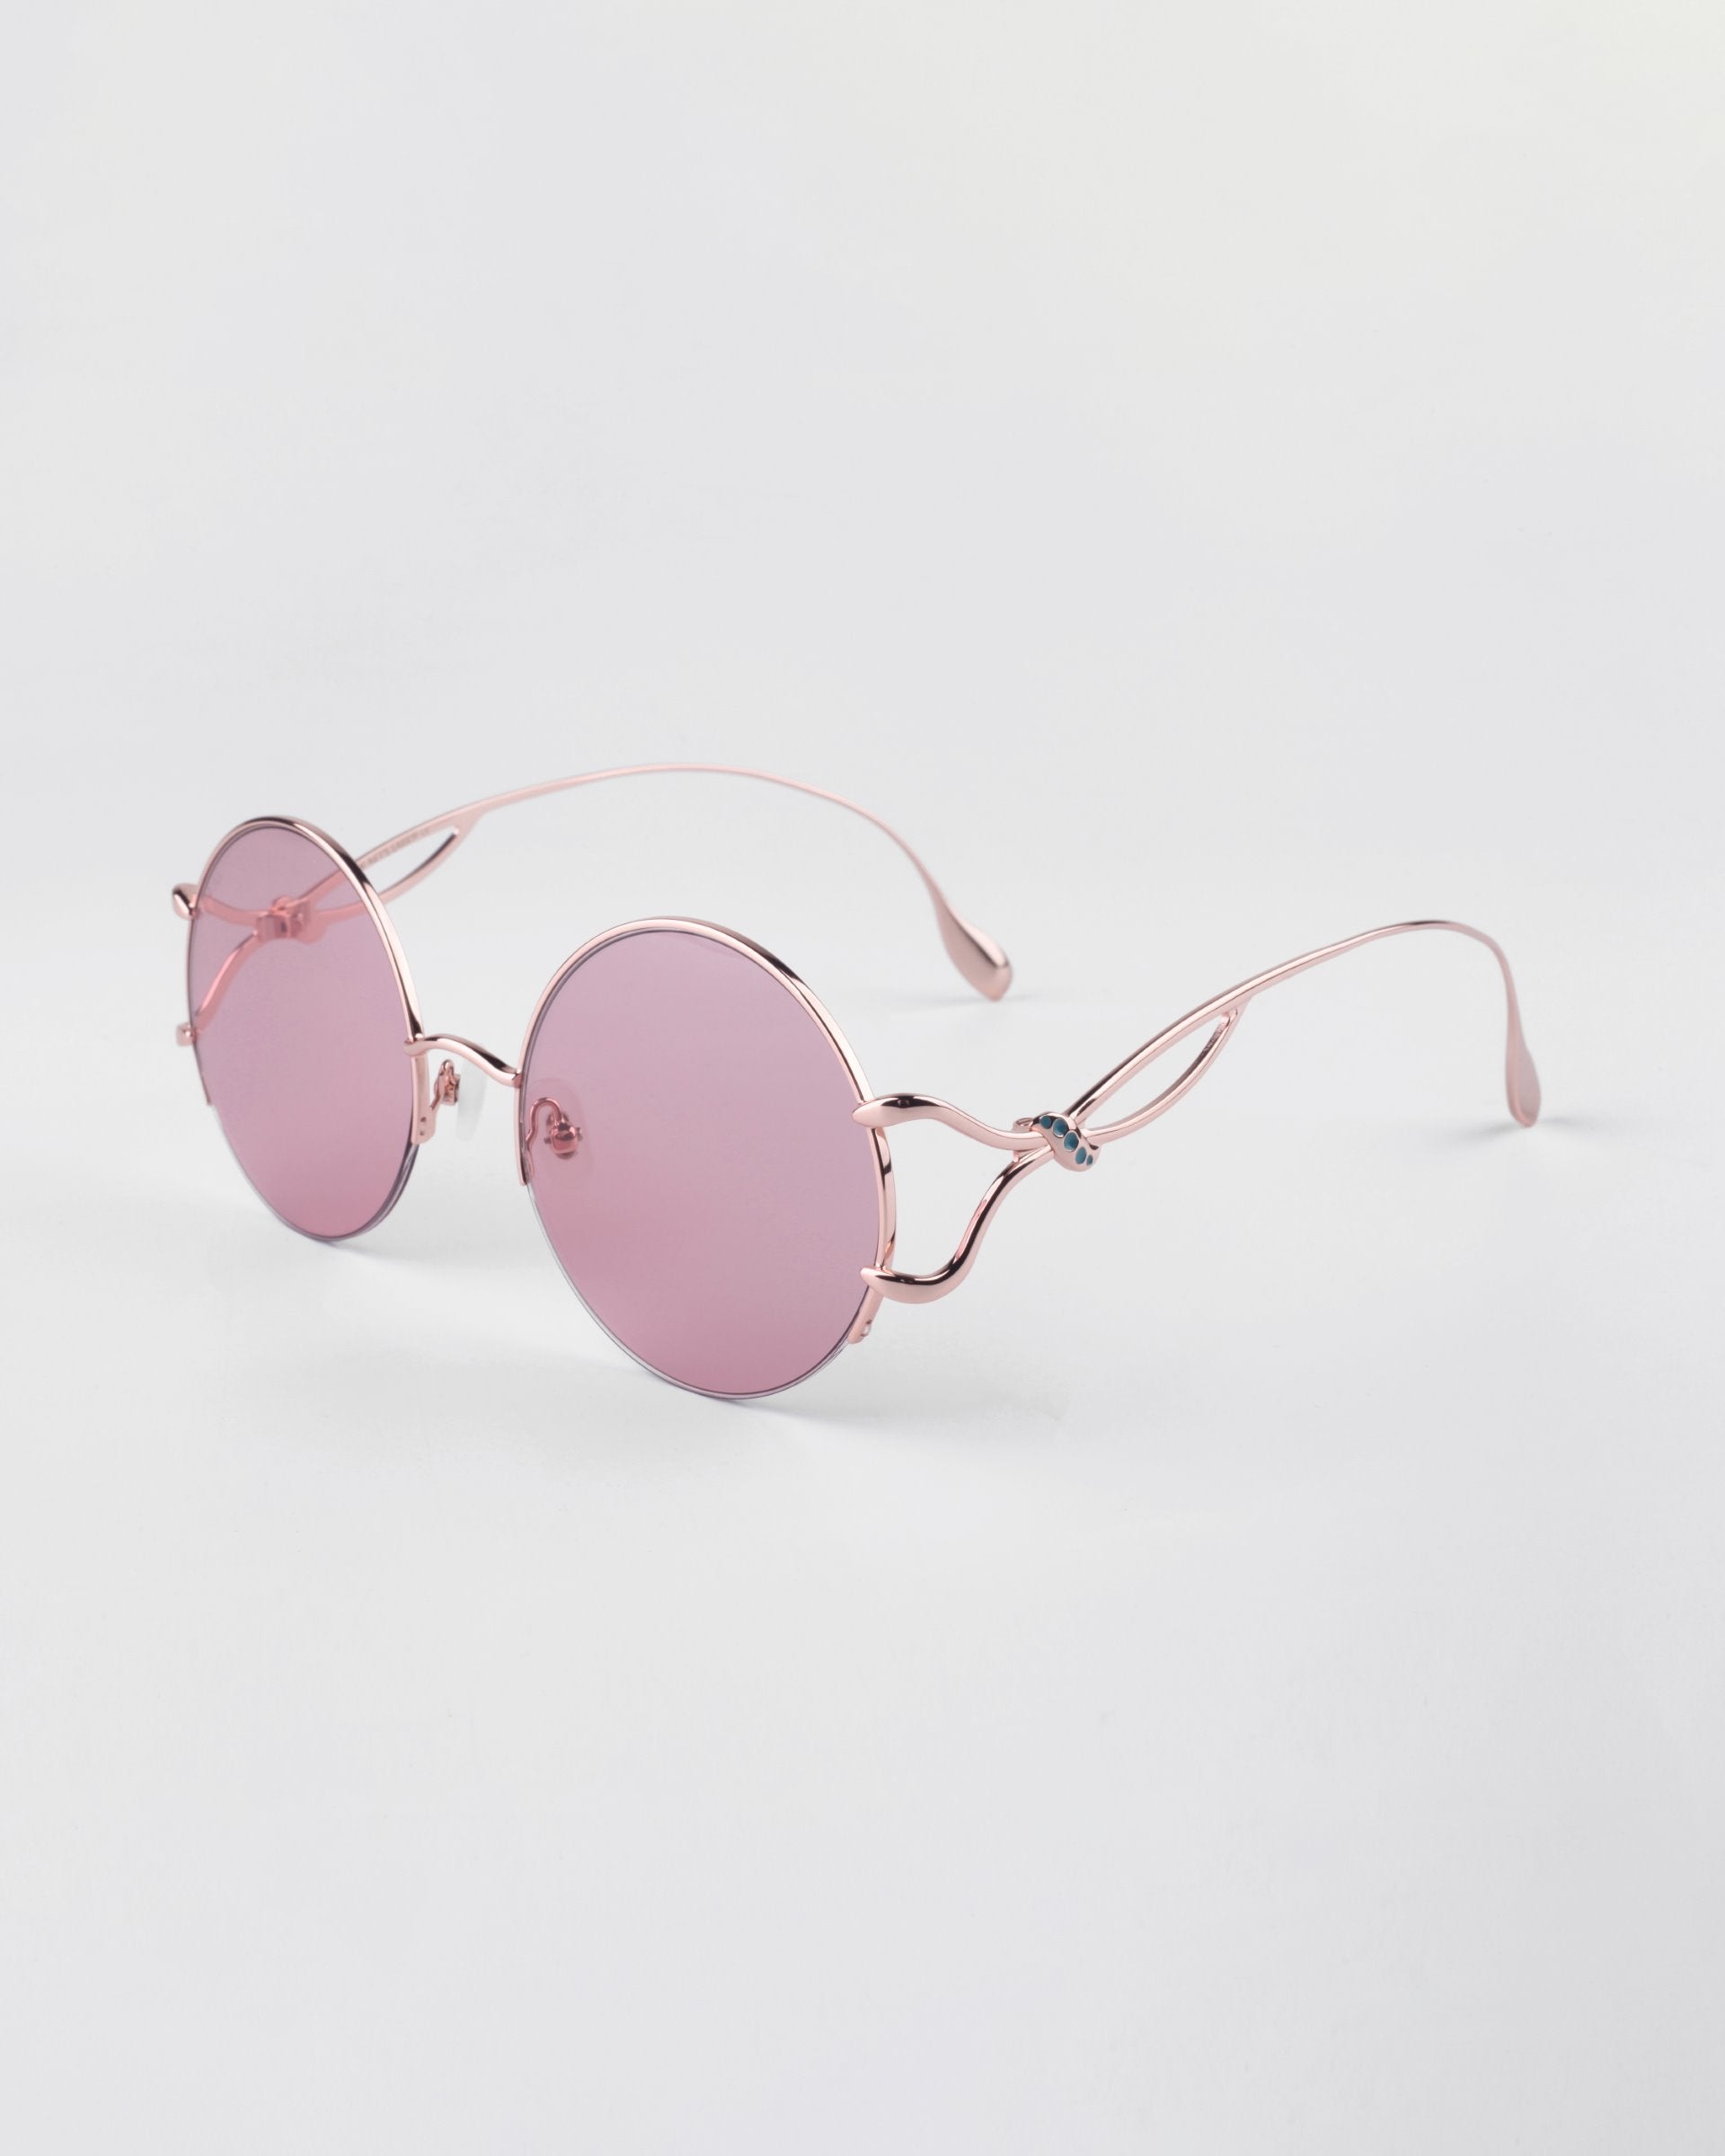 Diptych Sunglasses in Pink. Side View.